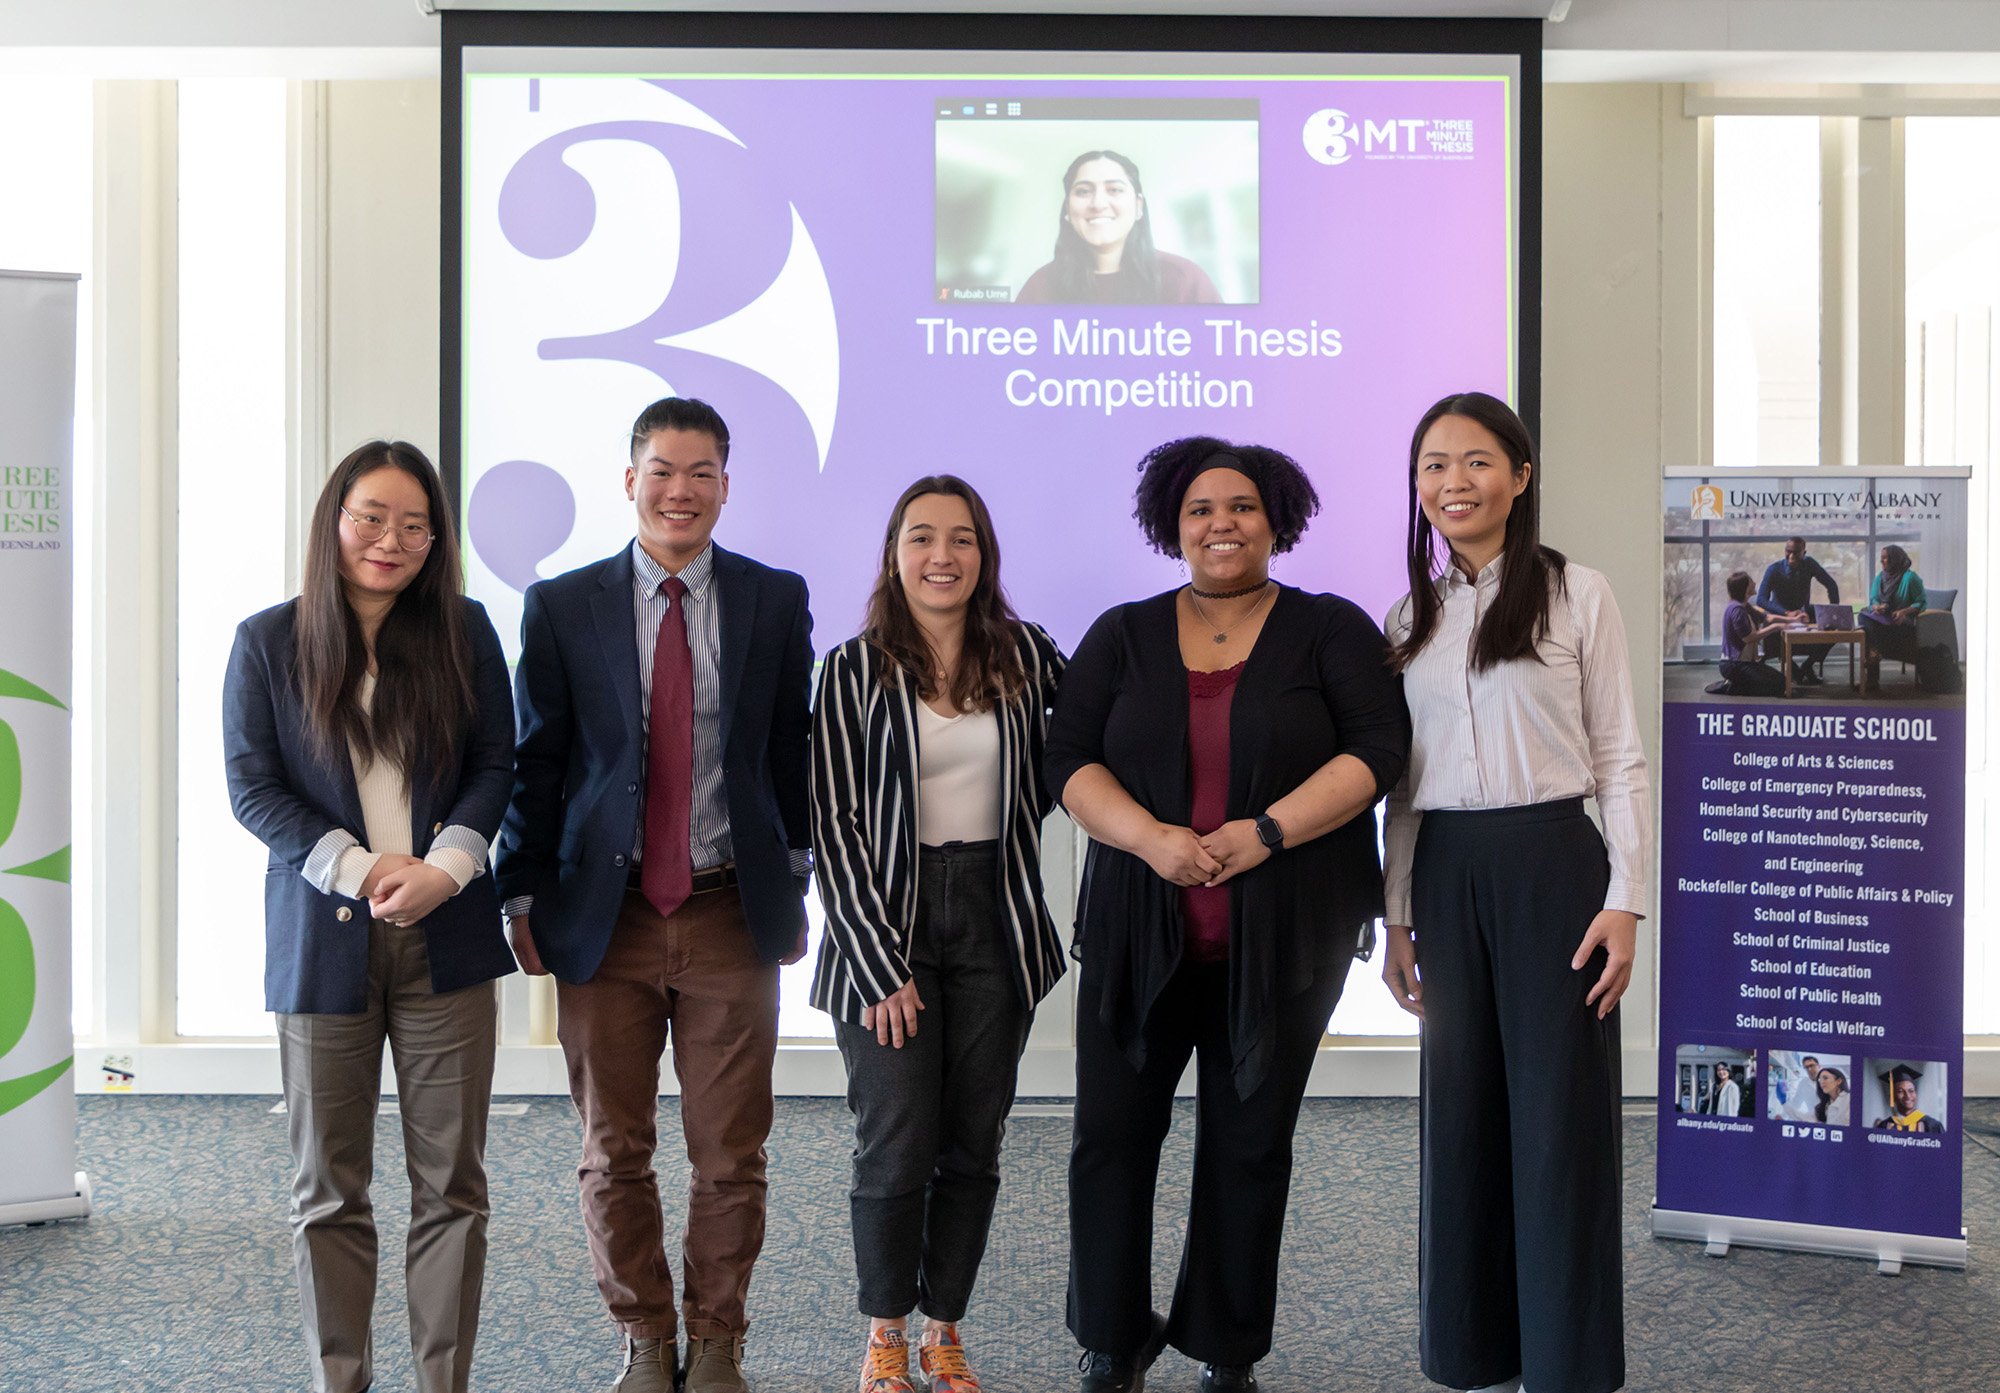 The finalists of the 3-Minute Thesis competition at UAlbany.